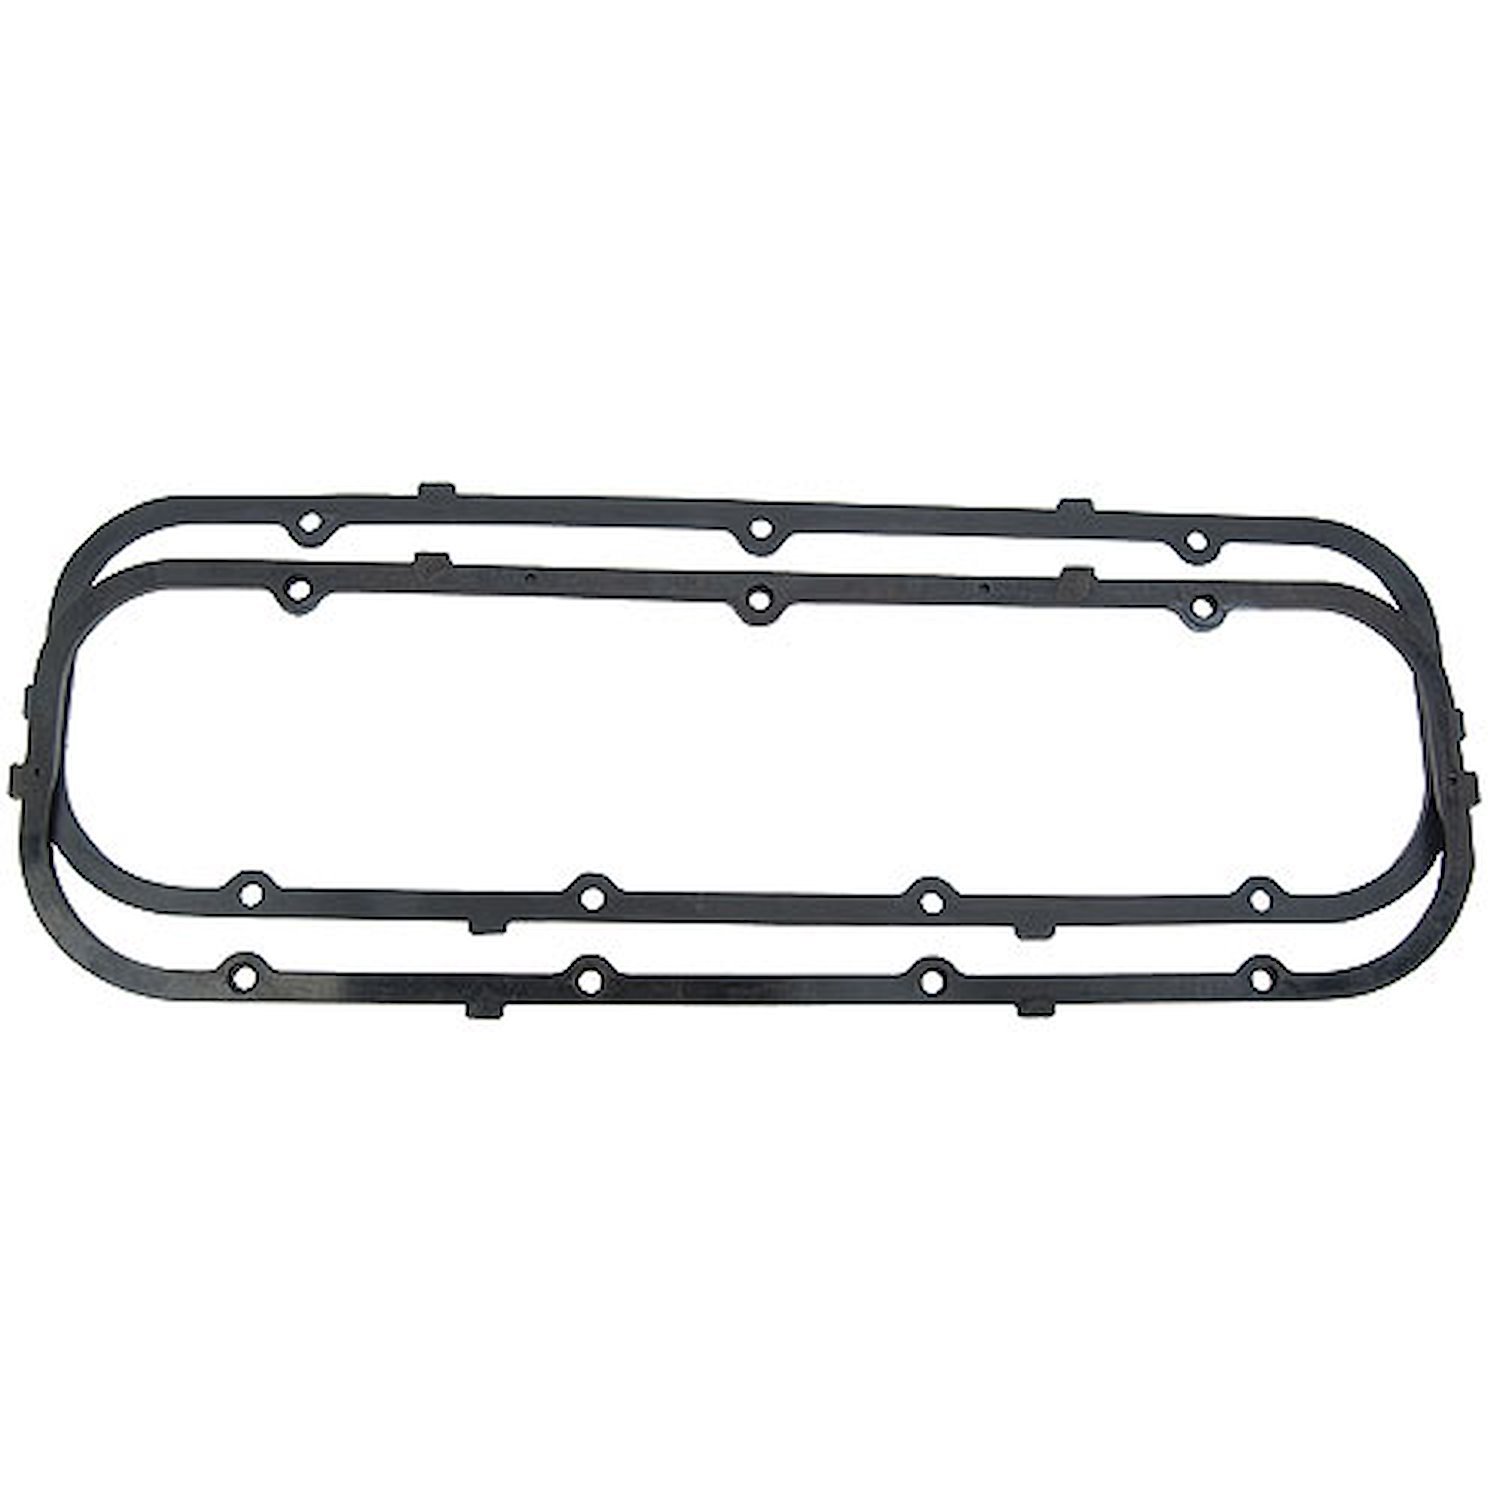 Steel Core Valve Cover Gaskets Big Block Chevy